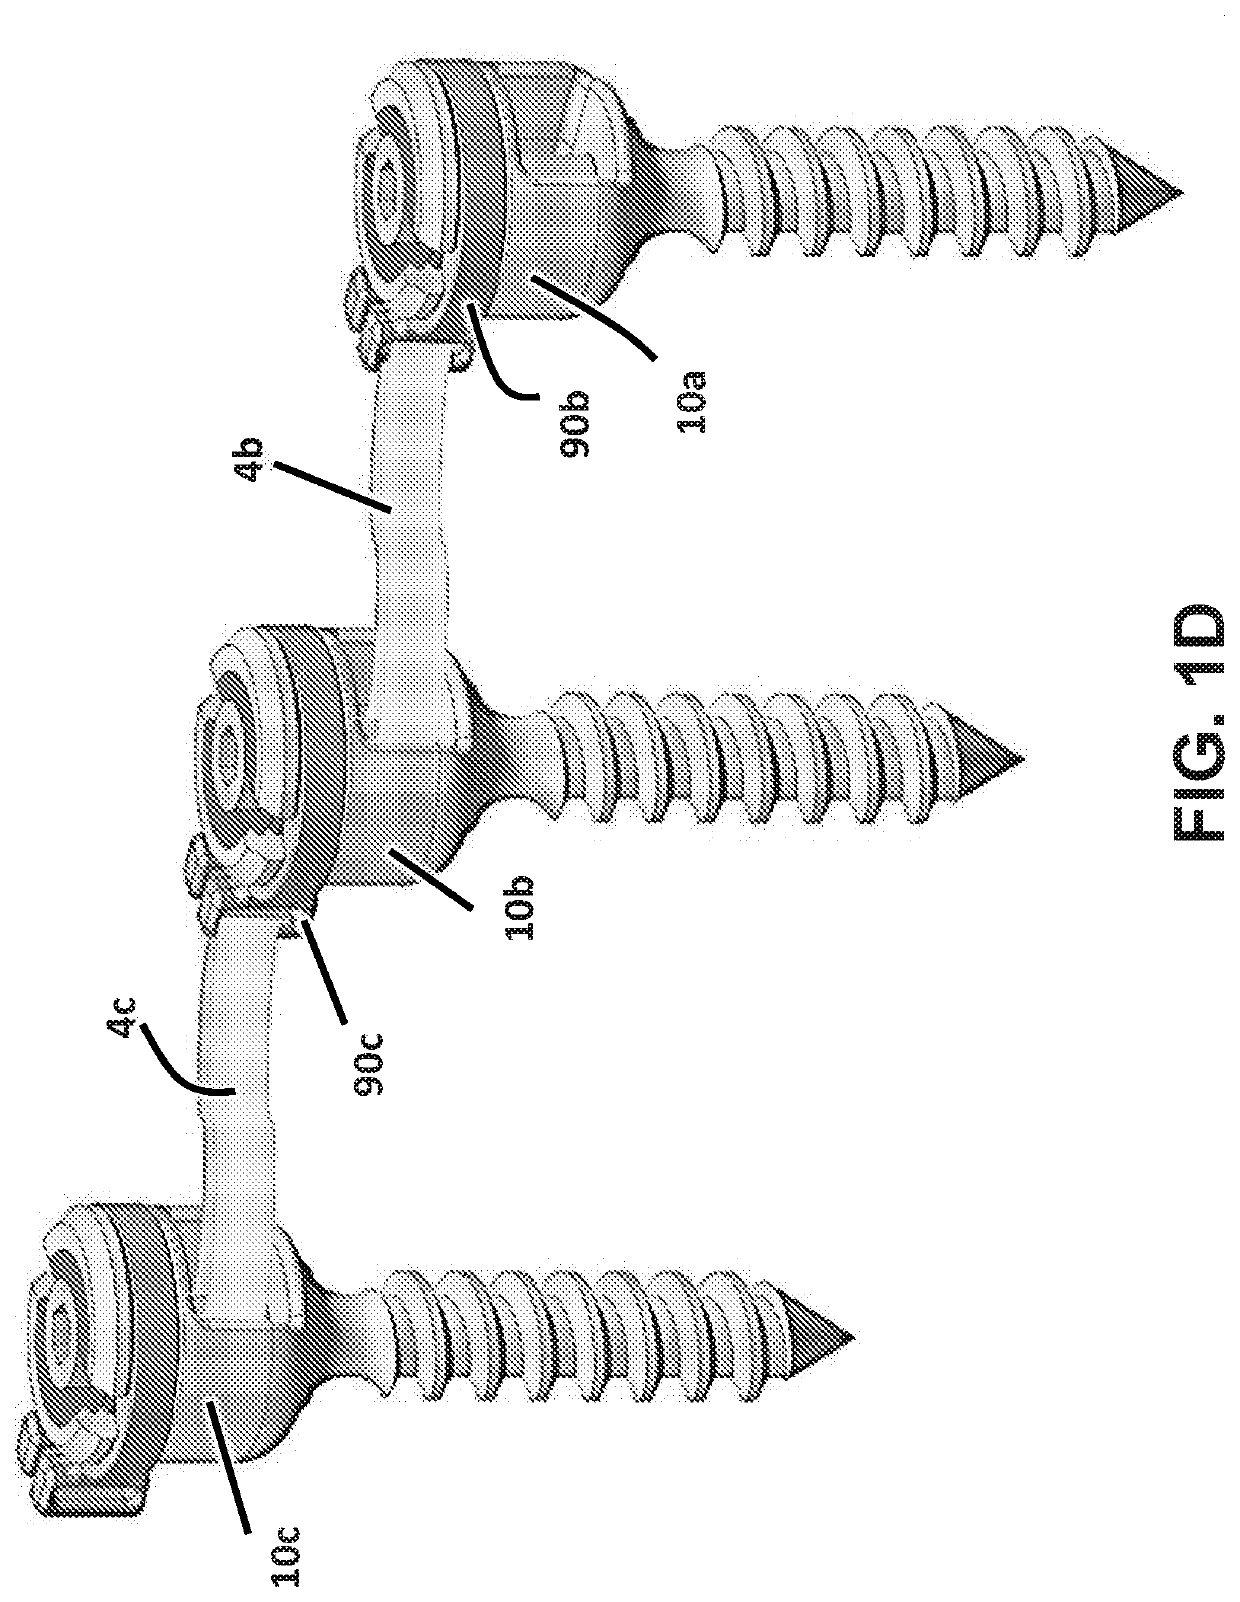 Apparatus and methods for spooled vertebral anchors